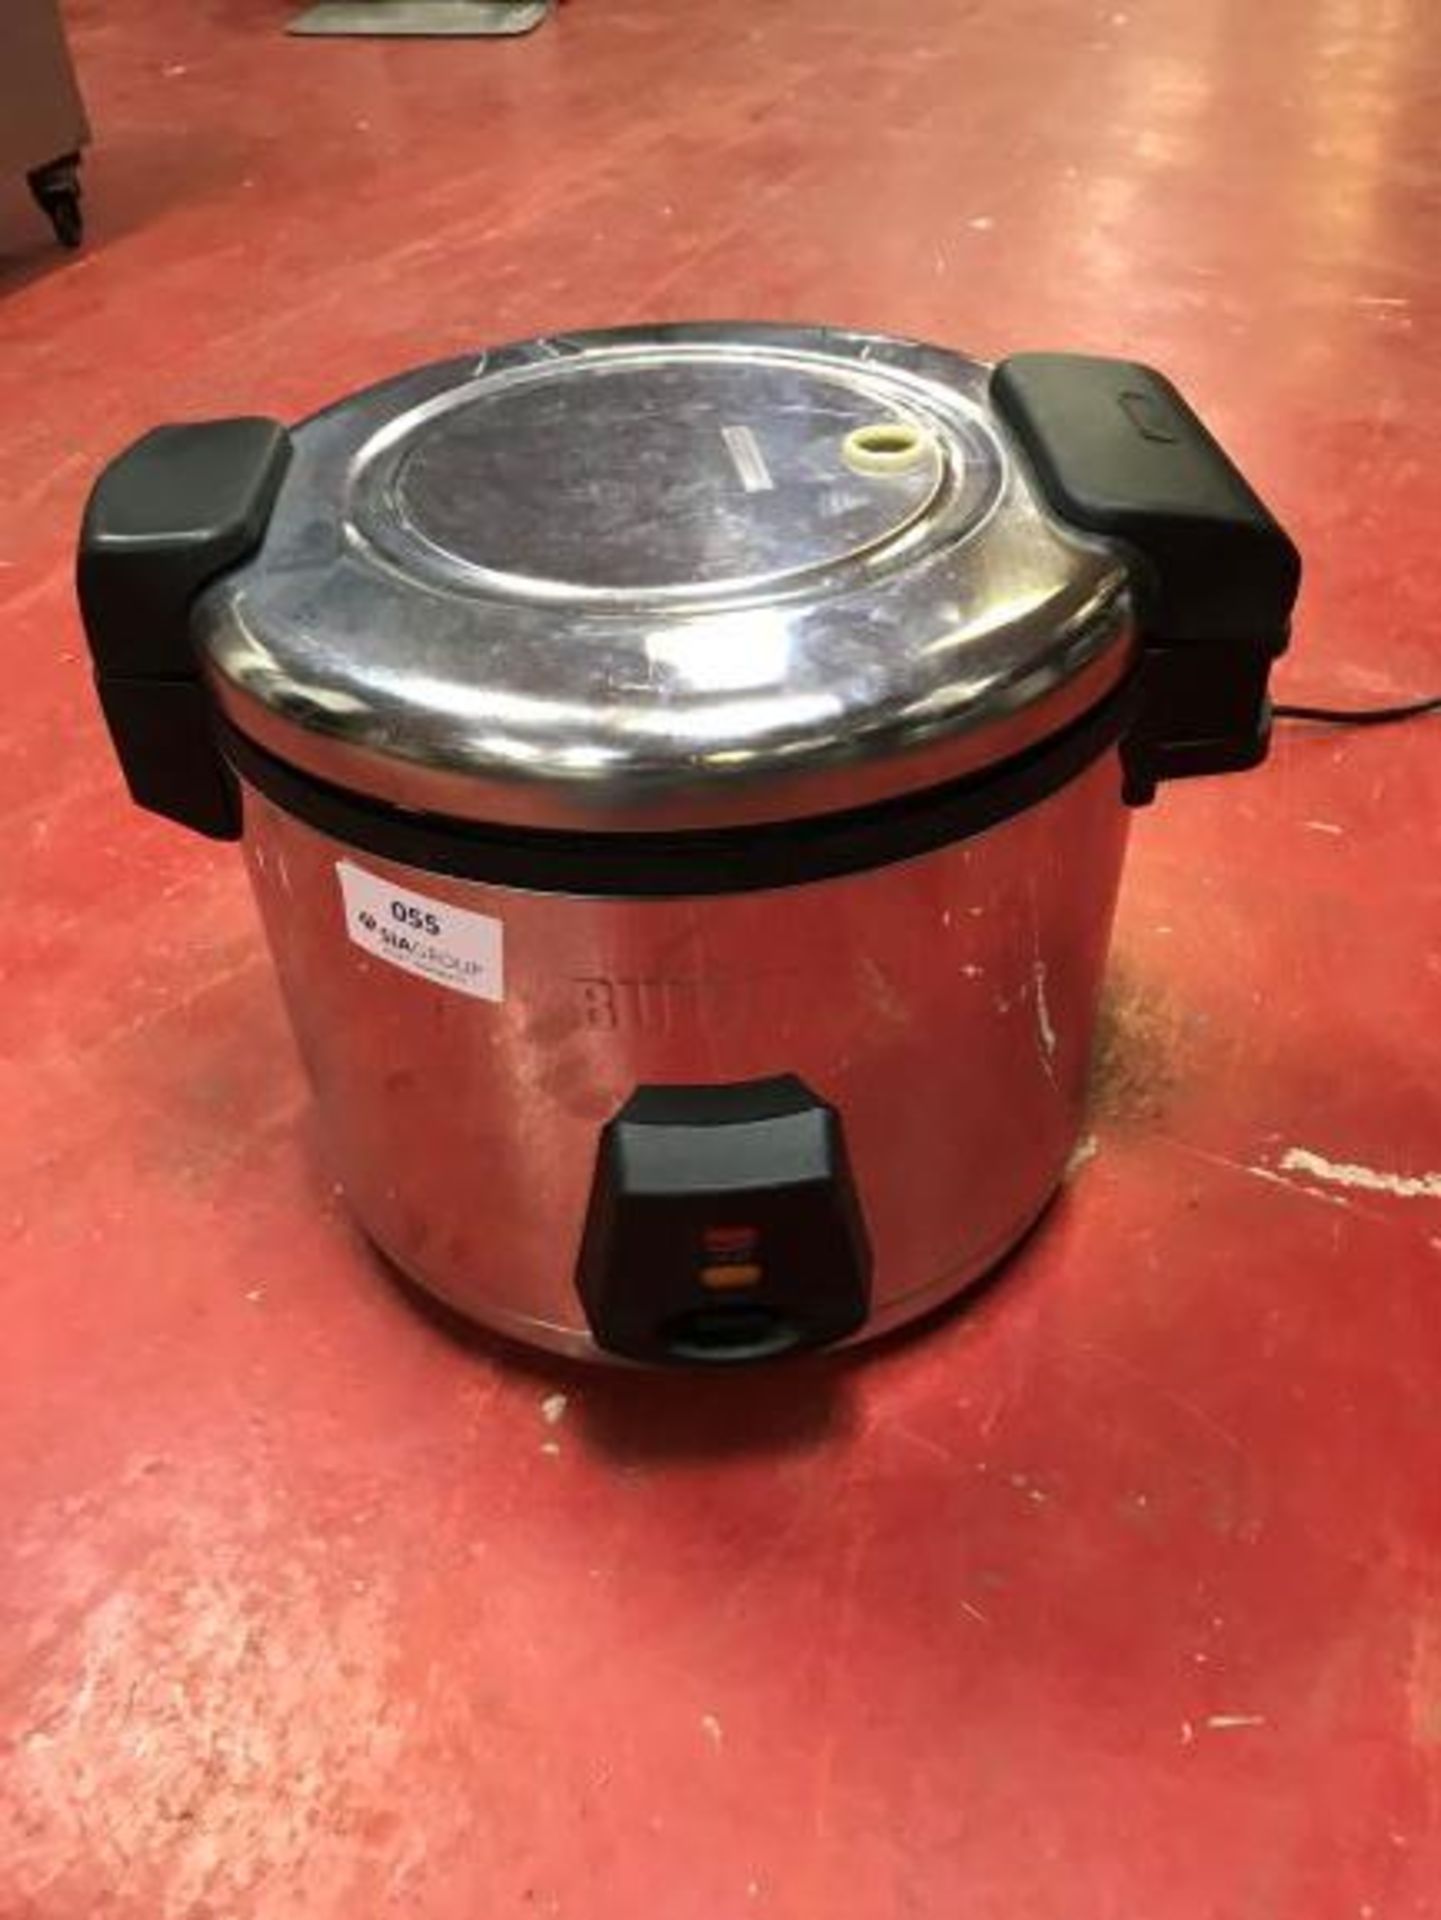 Buffalo J300 6 Litre stainless steel commercial rice cooker